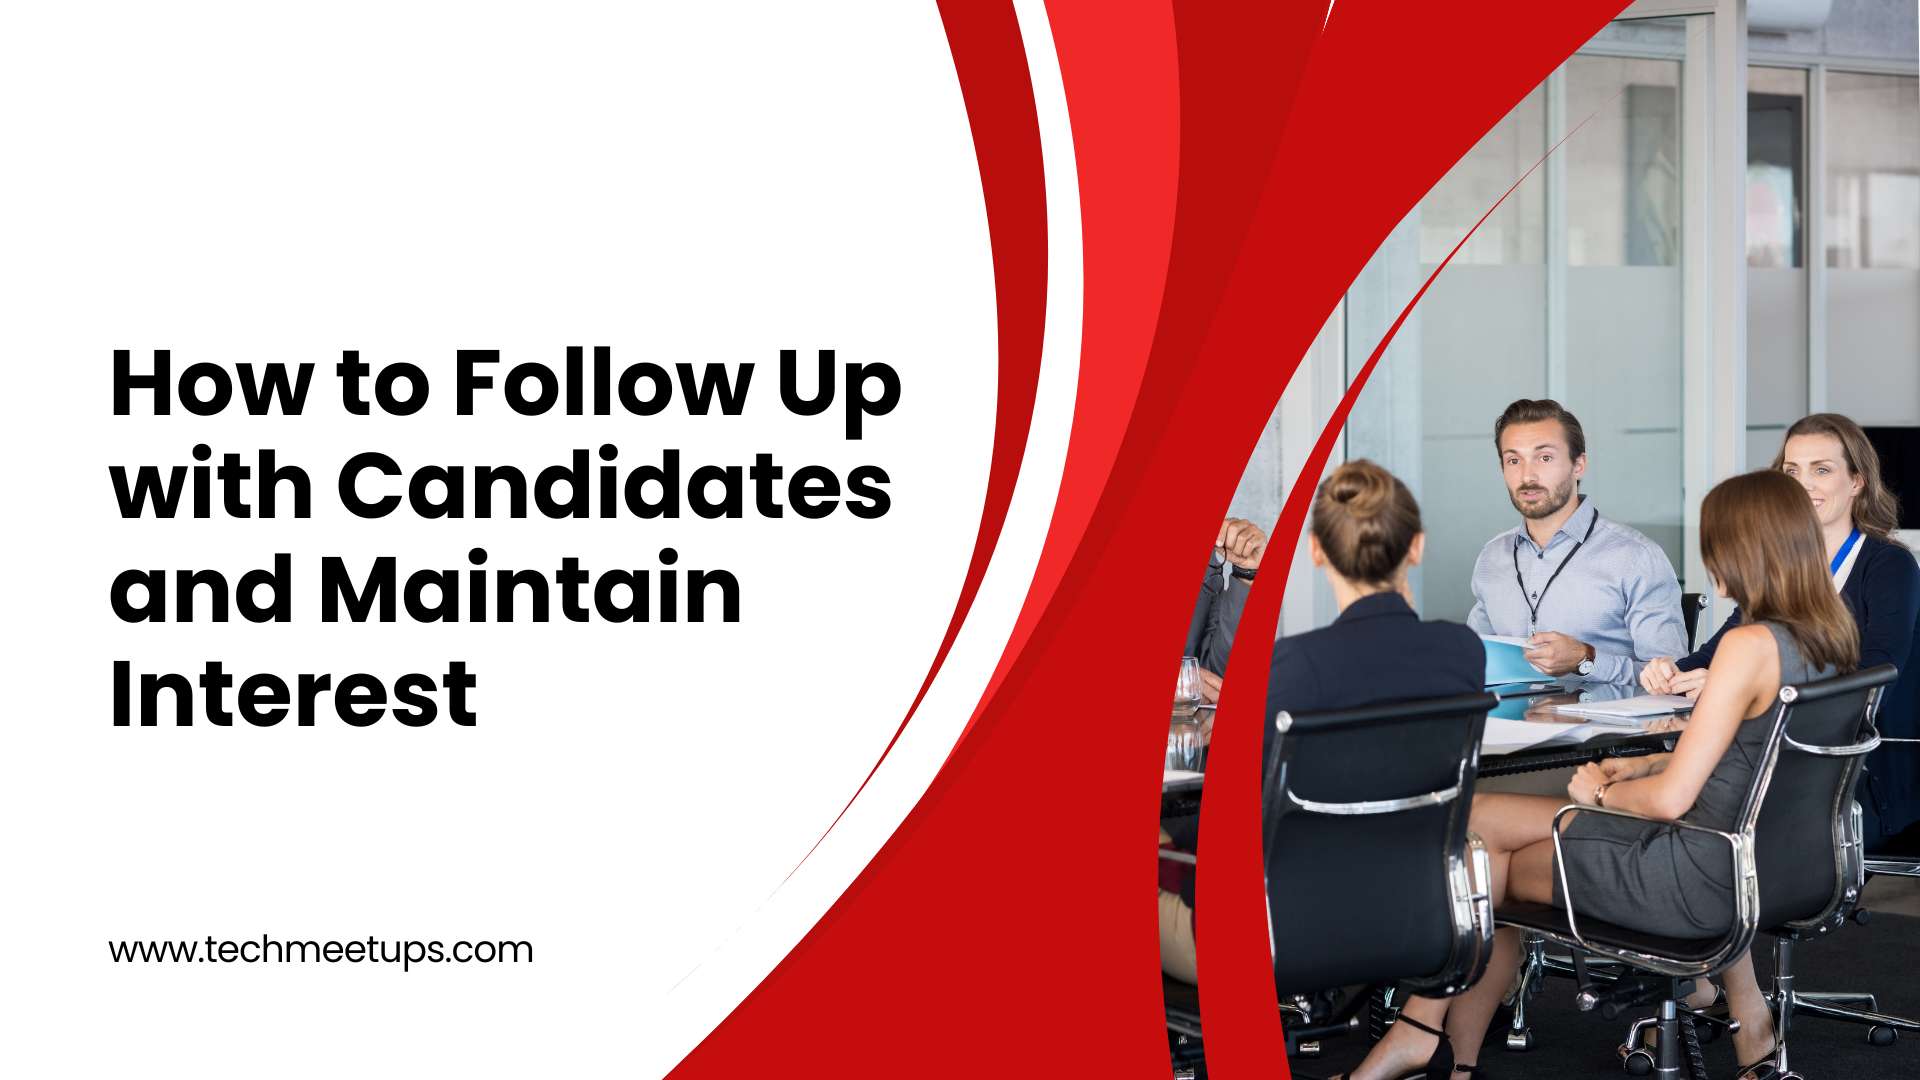 How to Follow Up with Candidates